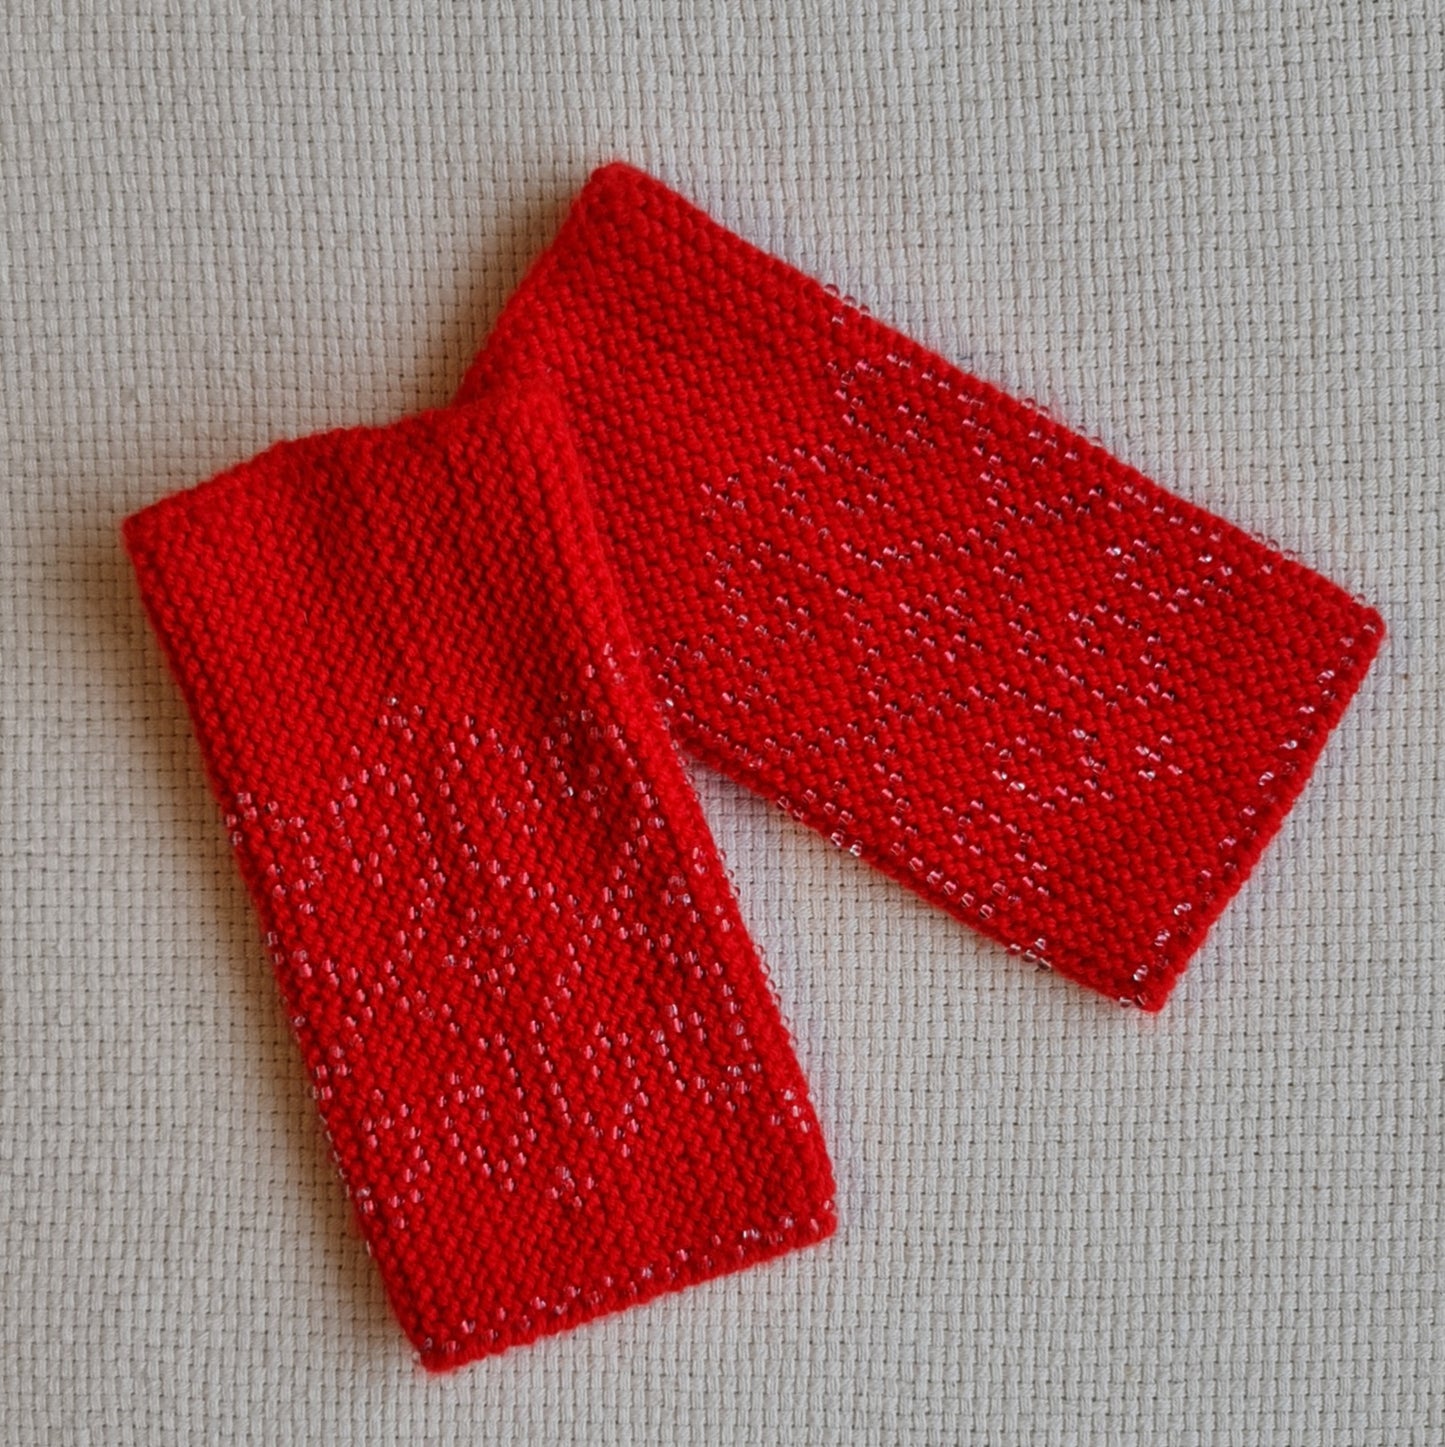 Red Hand-Knitted Wraps/Pulse Warmers with Transparent Beaded Patterns (16 x 8 cm) (DAZĖ)